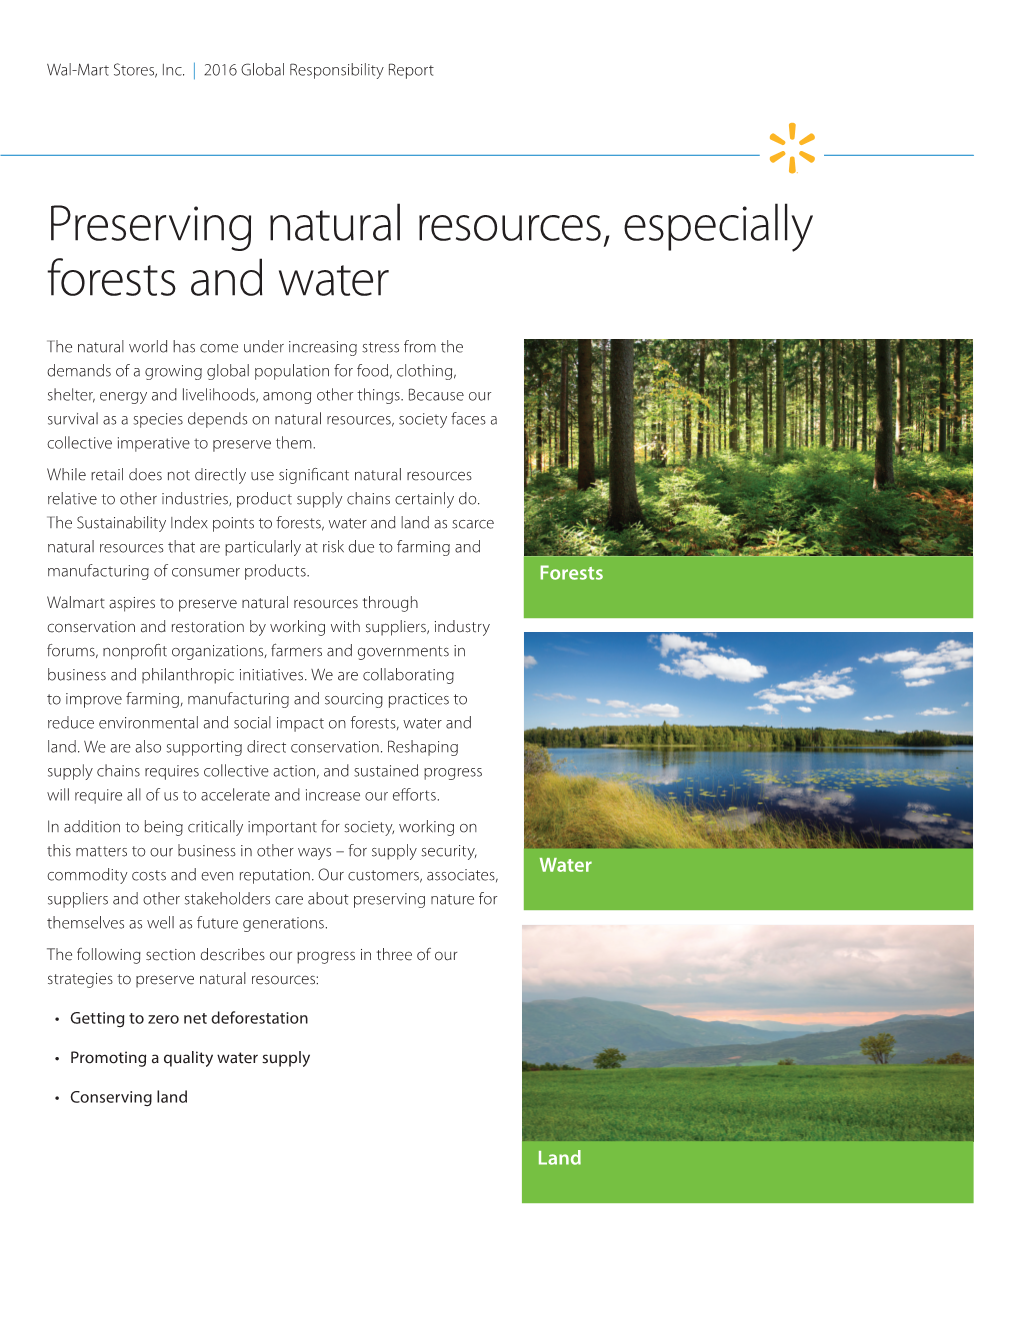 Preserving Natural Resources, Especially Forests and Water